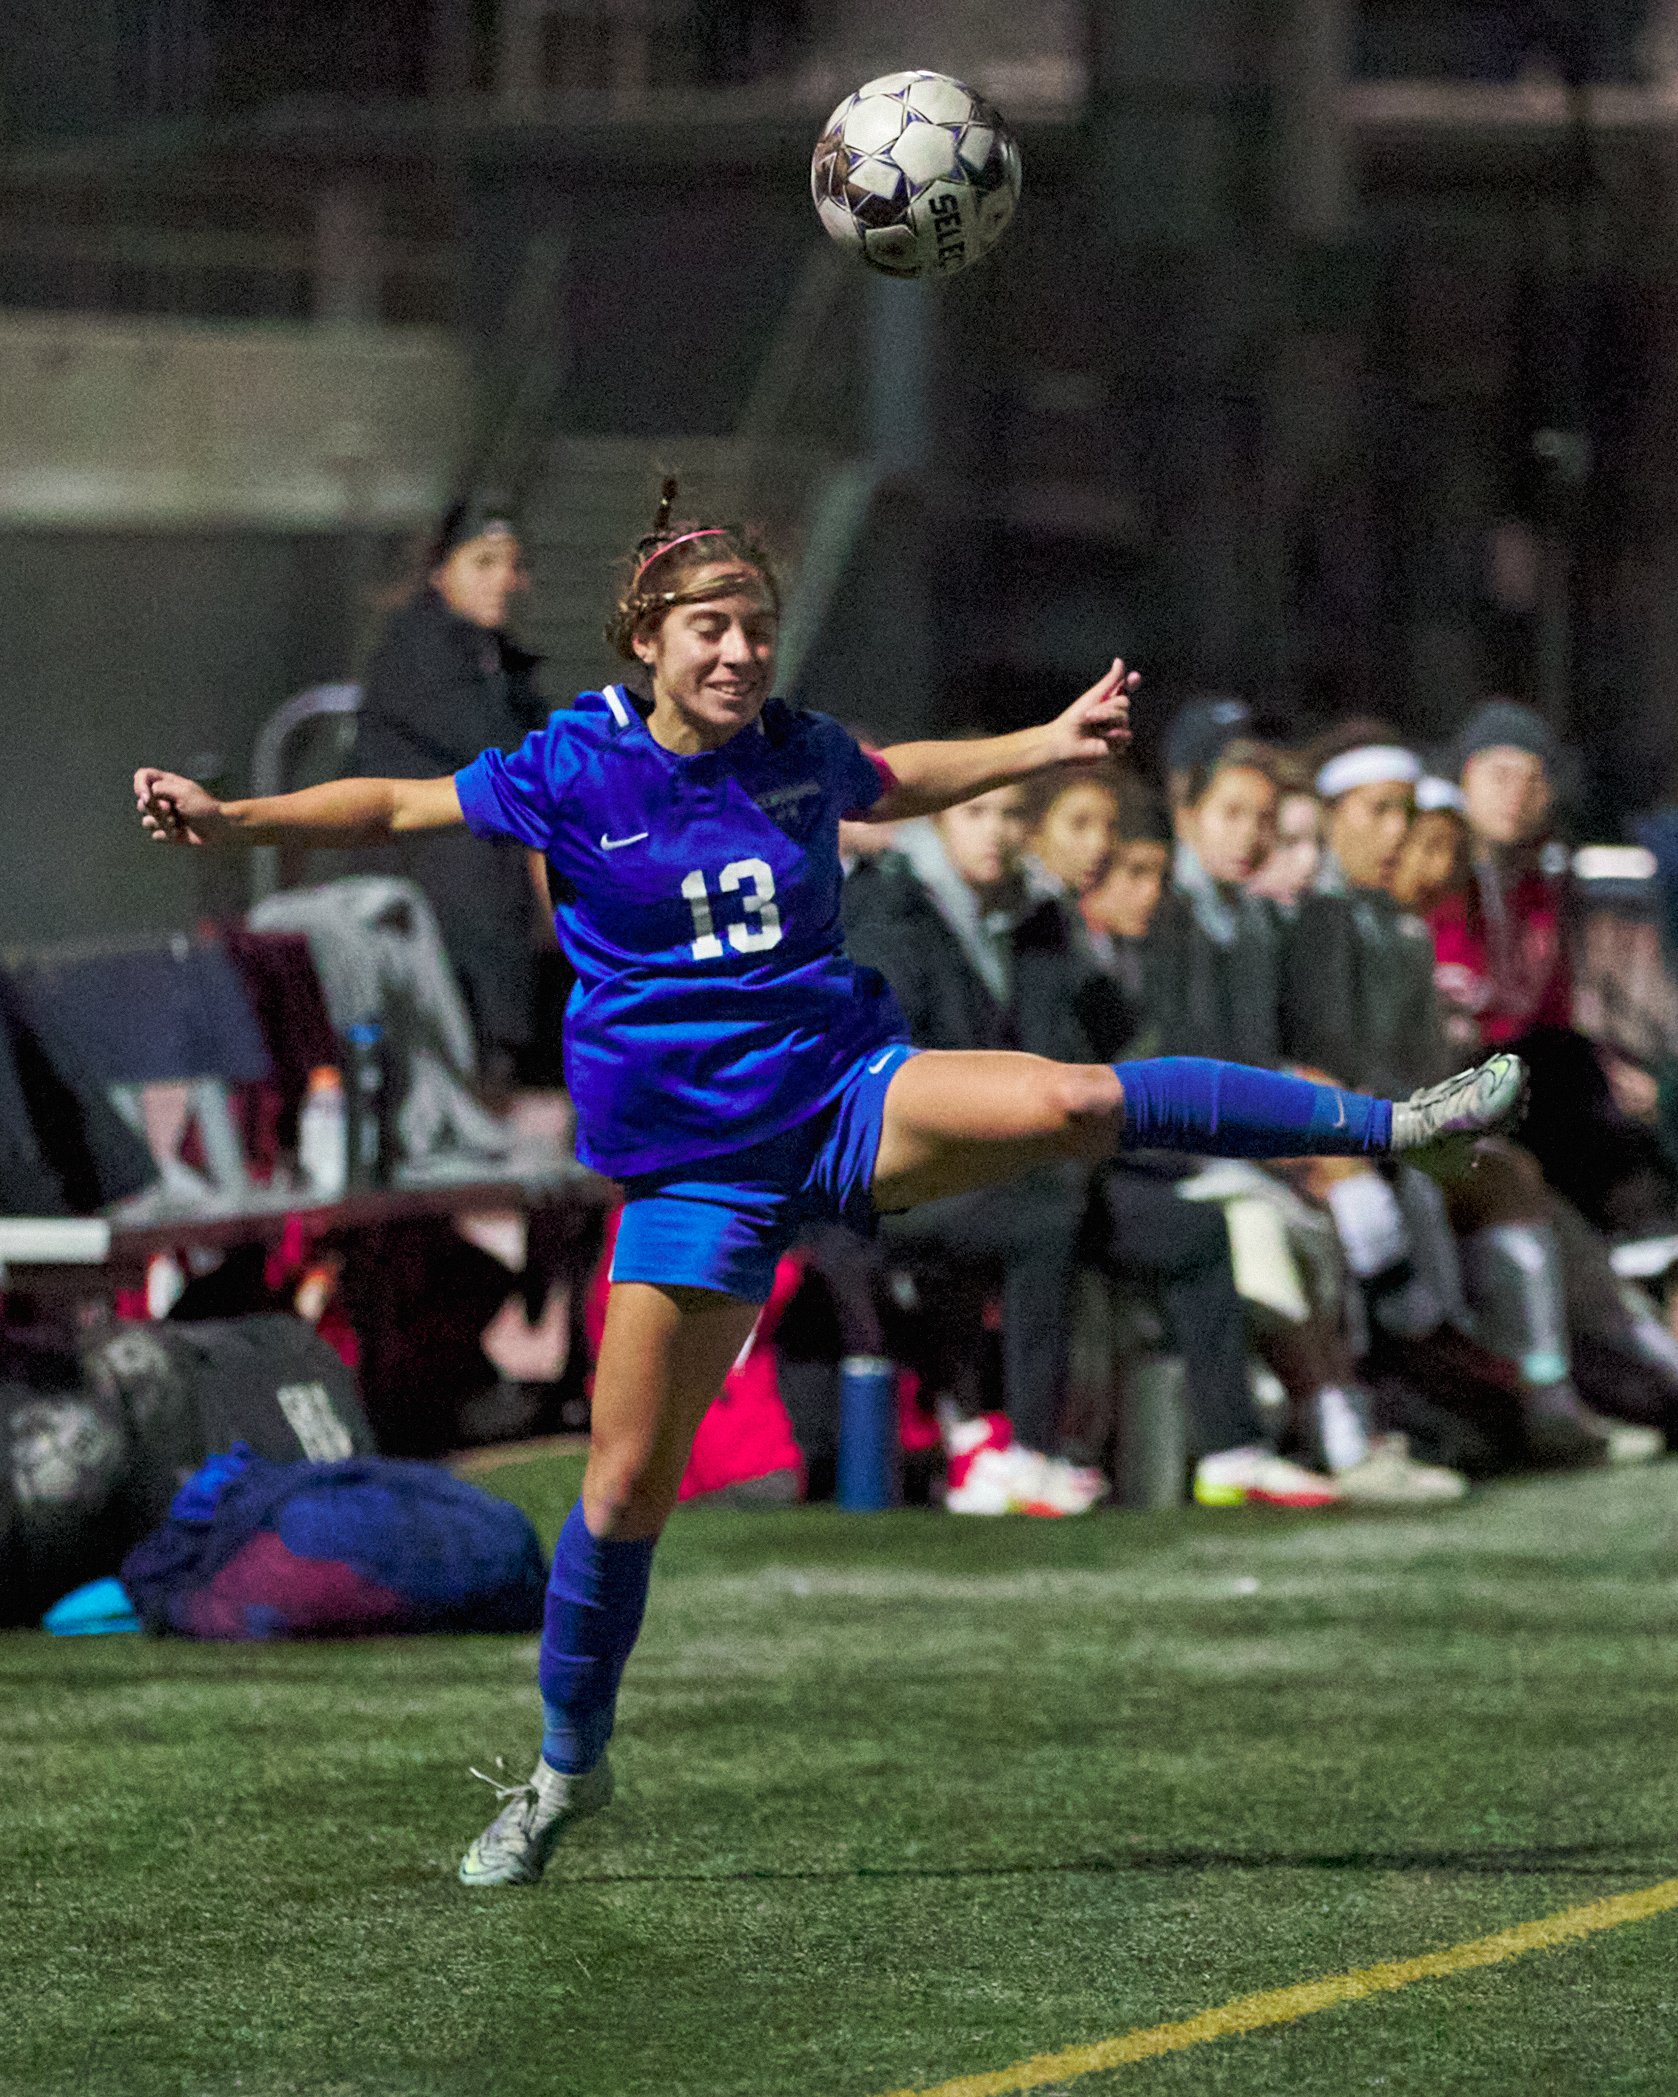  Santa Monica College Corsairs' Sophie Doumitt during the women's soccer match against the Bakersfield College Renegades on Wednesday, Nov. 16, 2022, at Corsair Field in Santa Monica, Calif. The Corsairs won 1-0. (Nicholas McCall | The Corsair) 